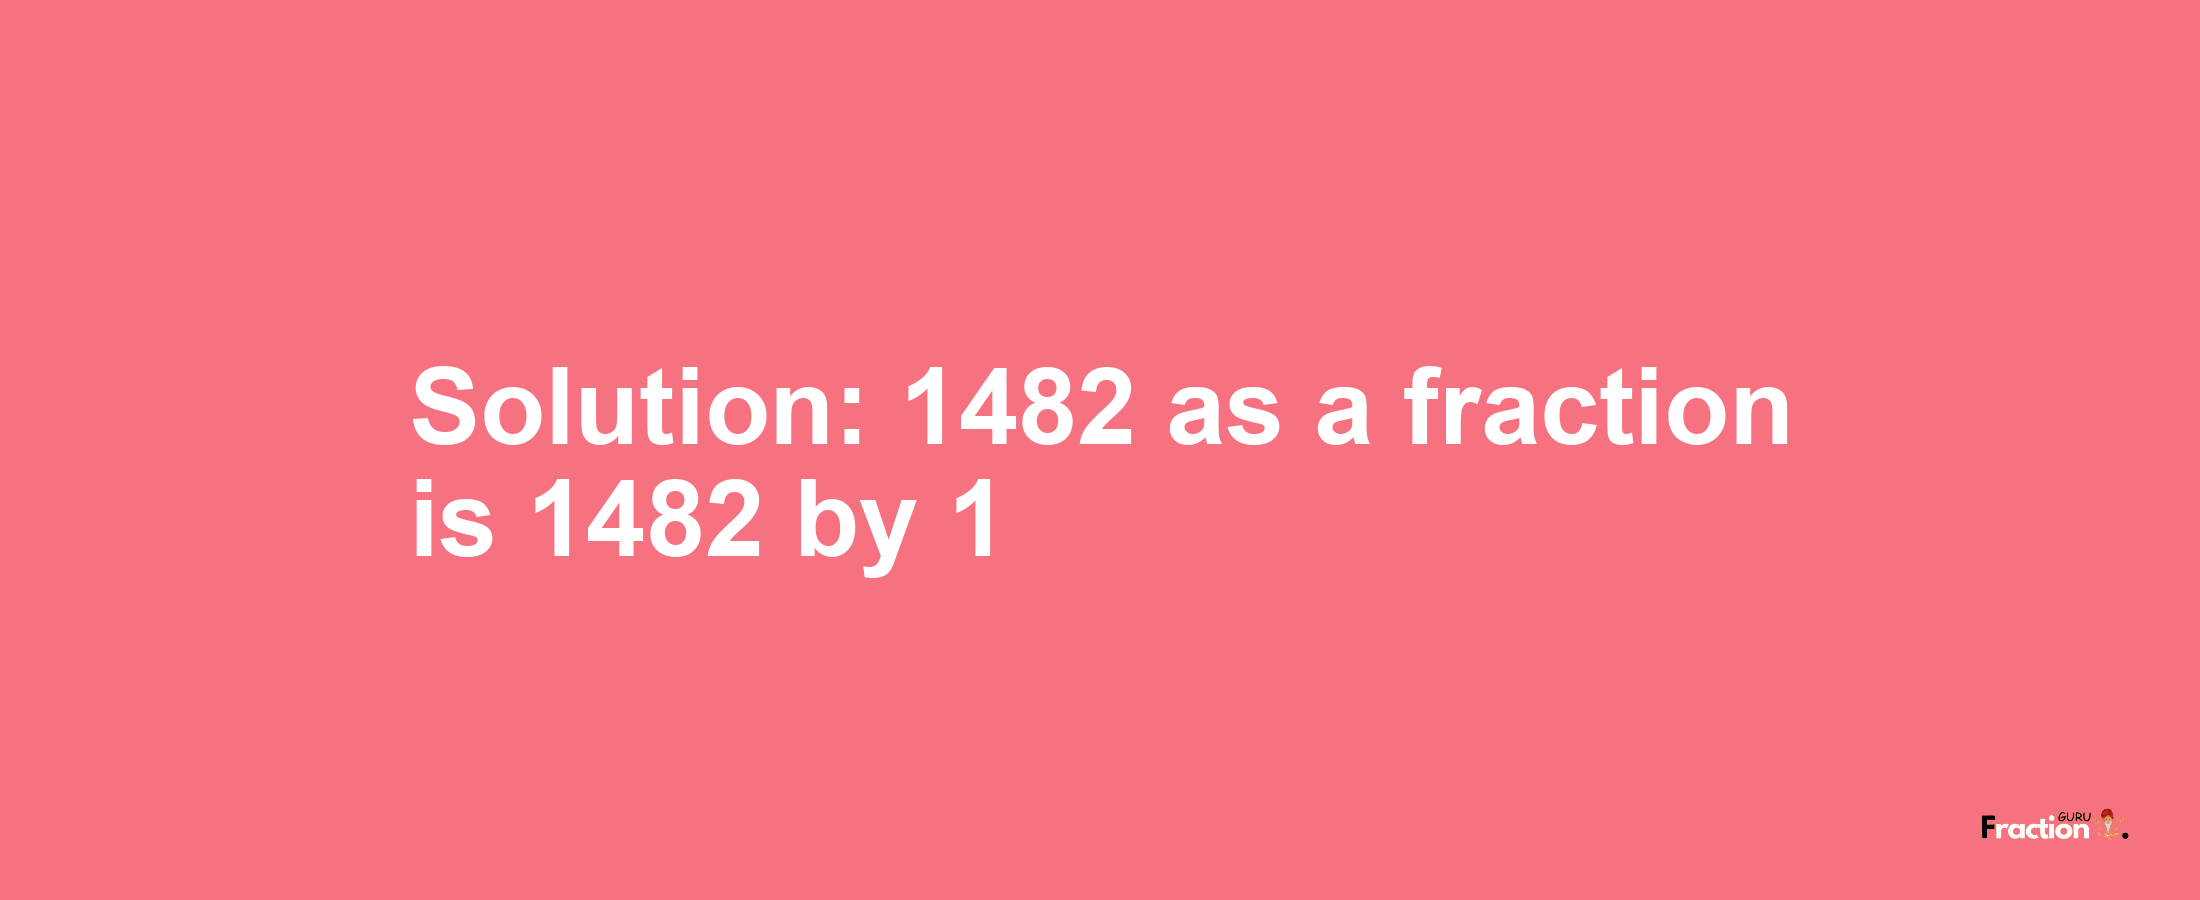 Solution:1482 as a fraction is 1482/1